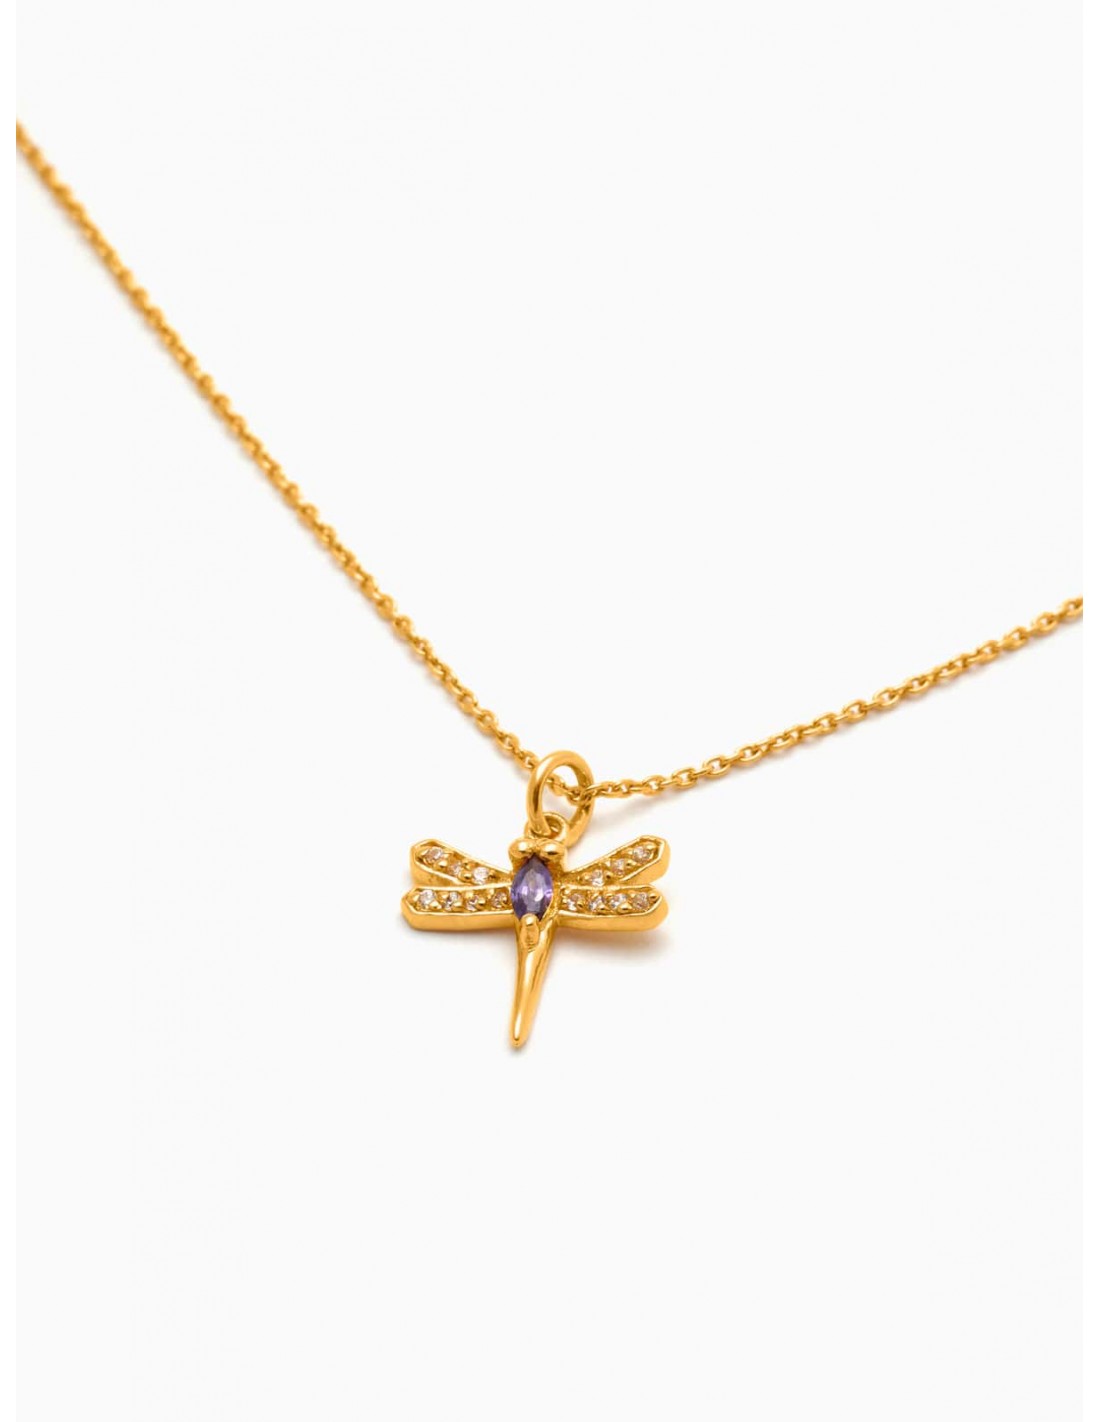 STERLING SILVER DRAGONFLY NECKLACE